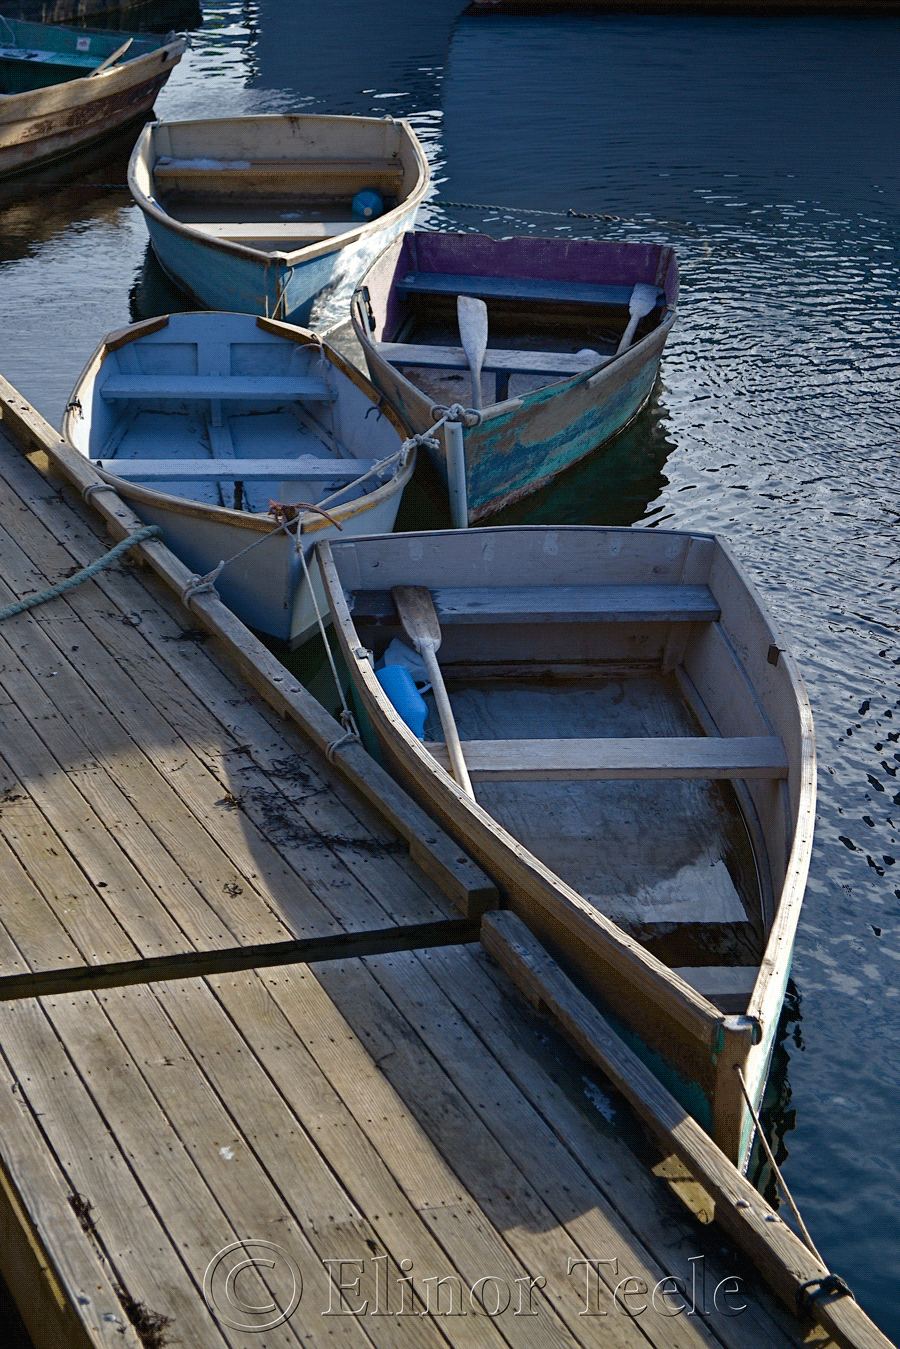 Boats in Pigeon Cove, Rockport MA